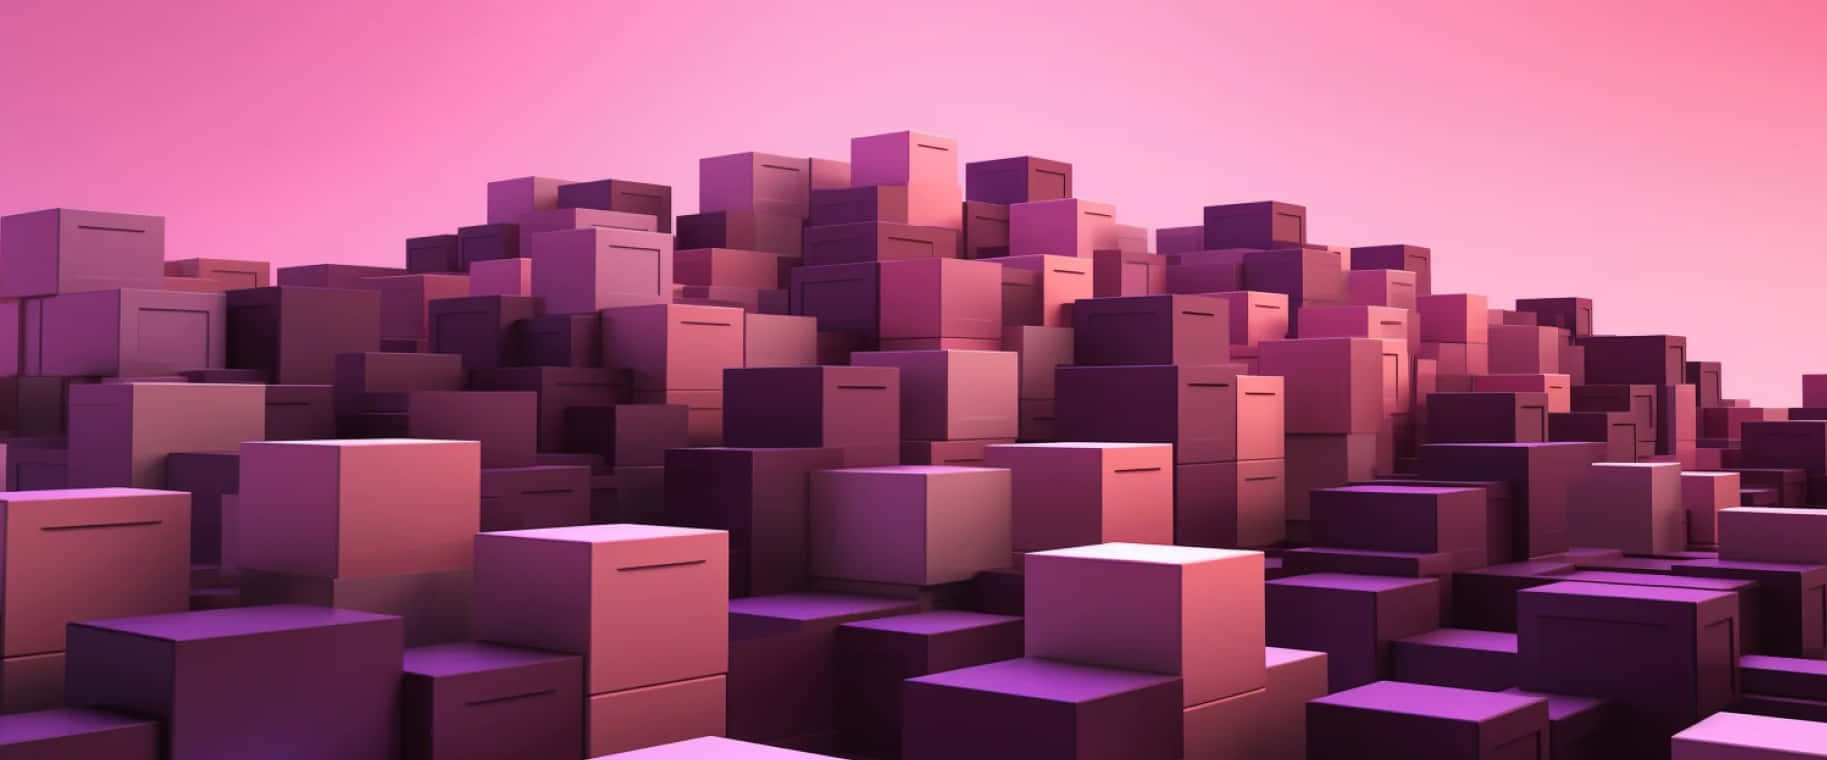 Abstract Pink Cubes Landscape Wallpaper